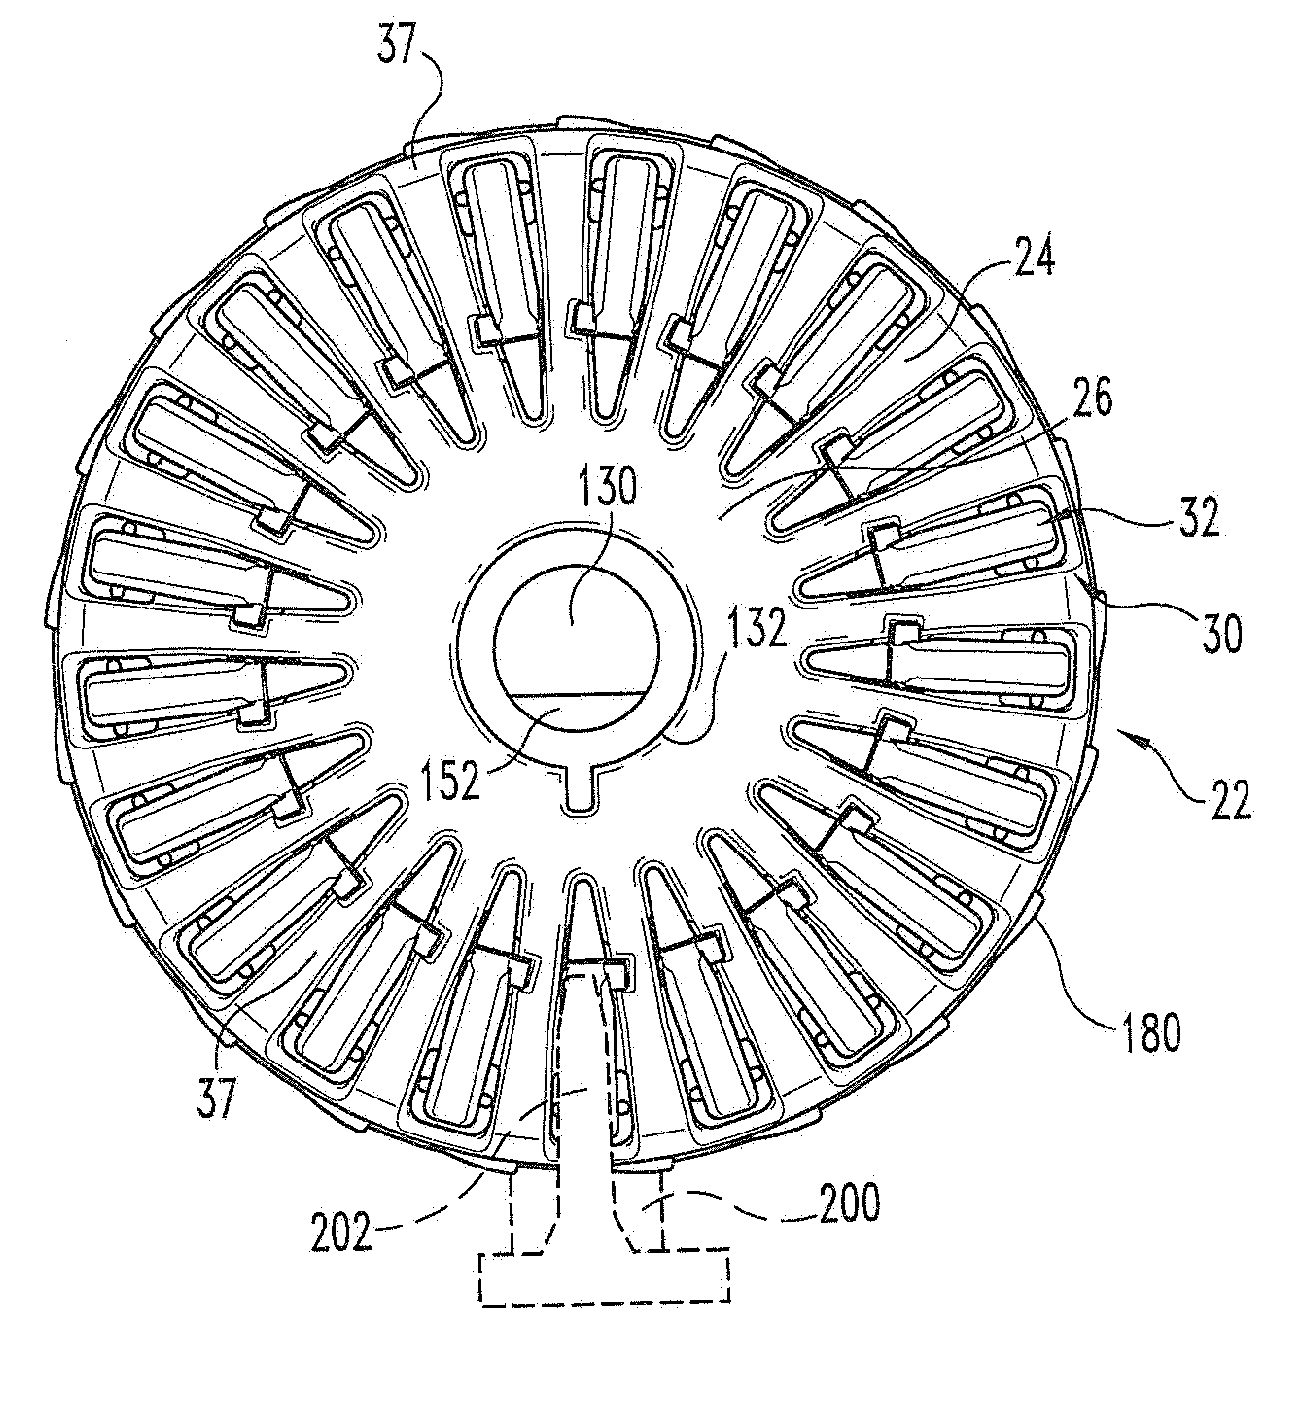 Cartridge with multiple injection needles for a medication injection device